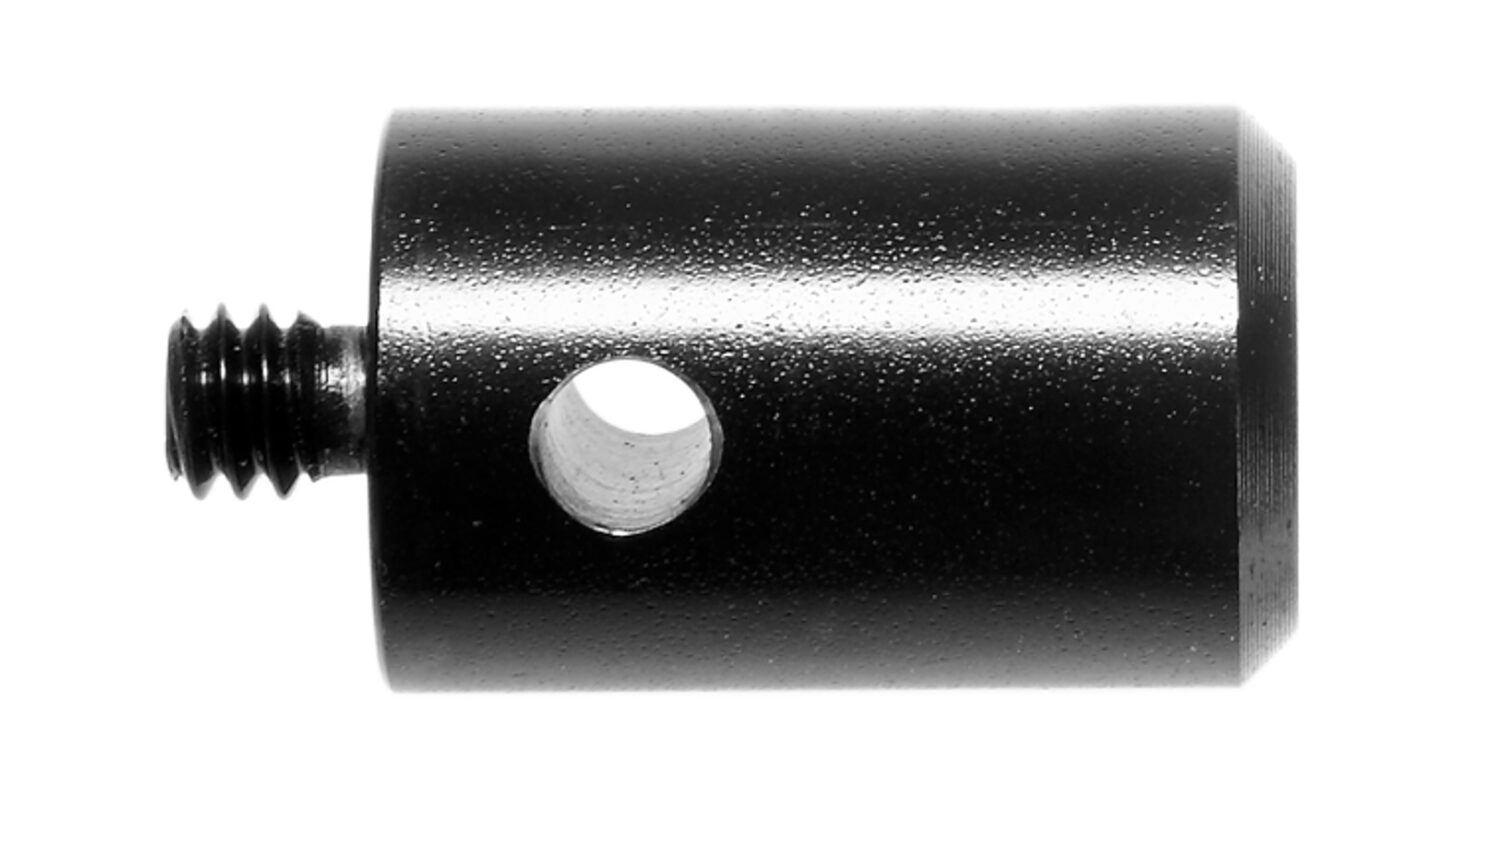 FOBA interchangeable adapter for lamps, ball heads and cameras